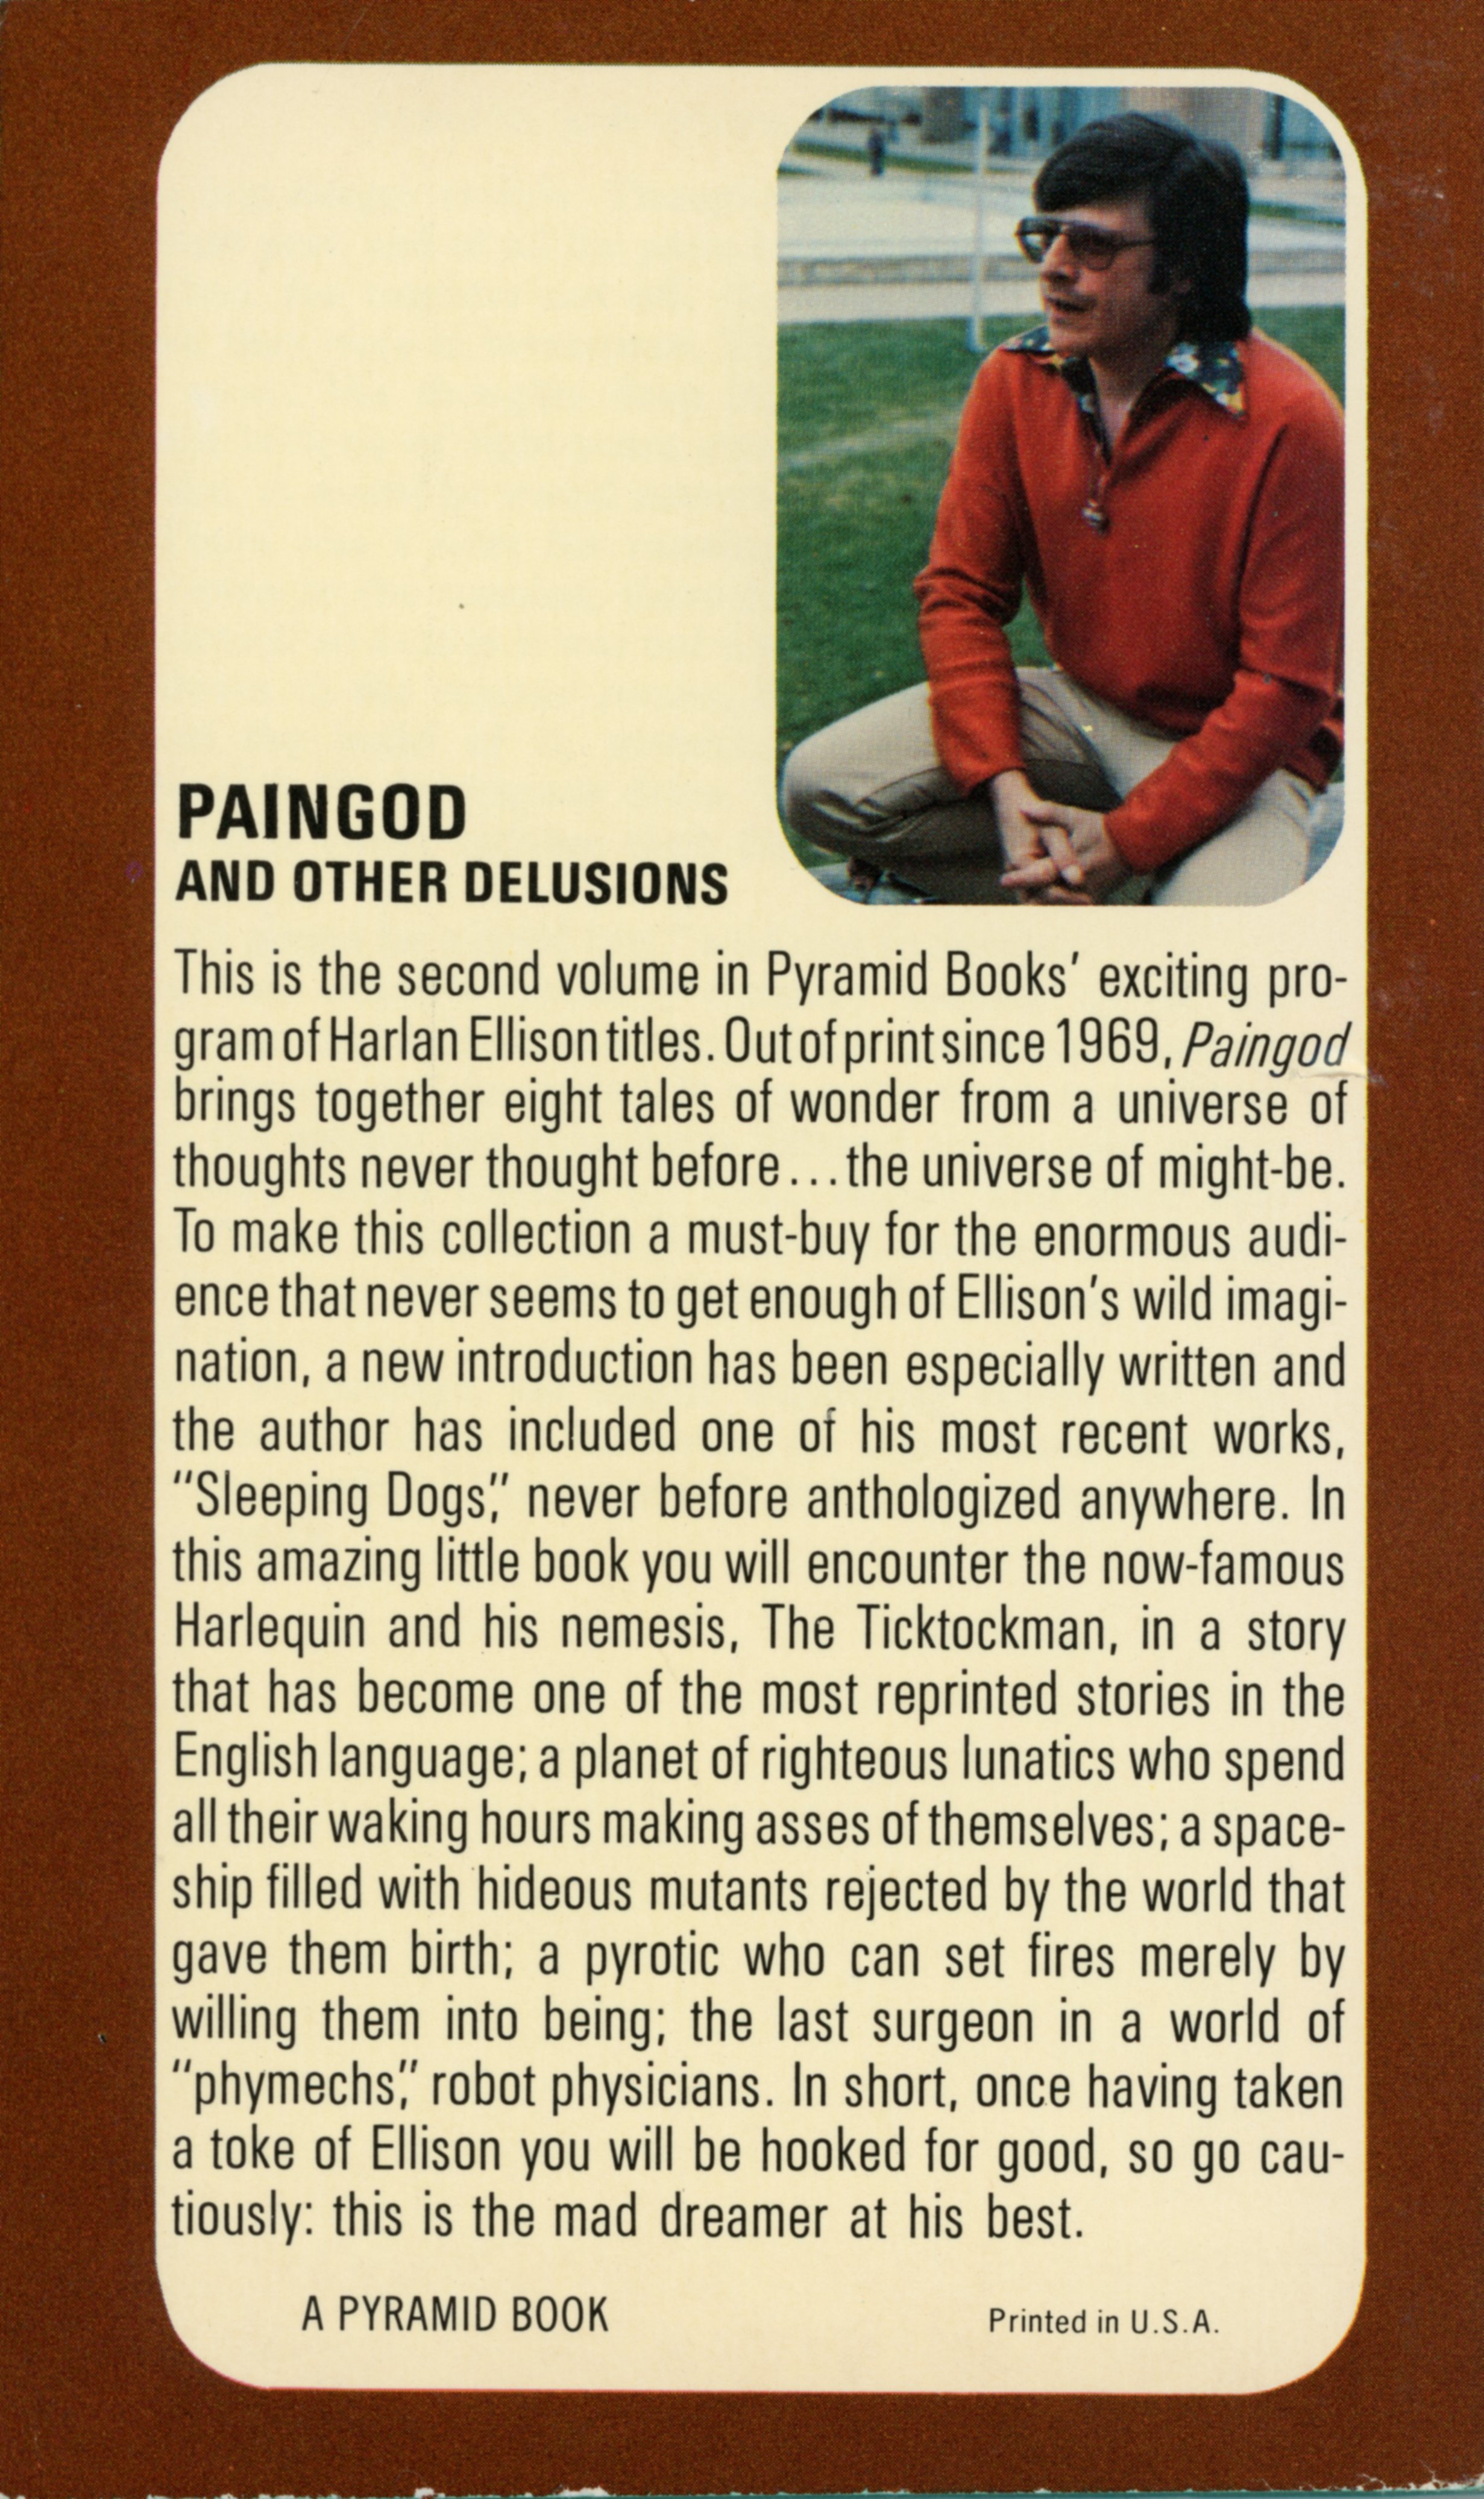 Paingod and Other Delusions by Harlan Ellison